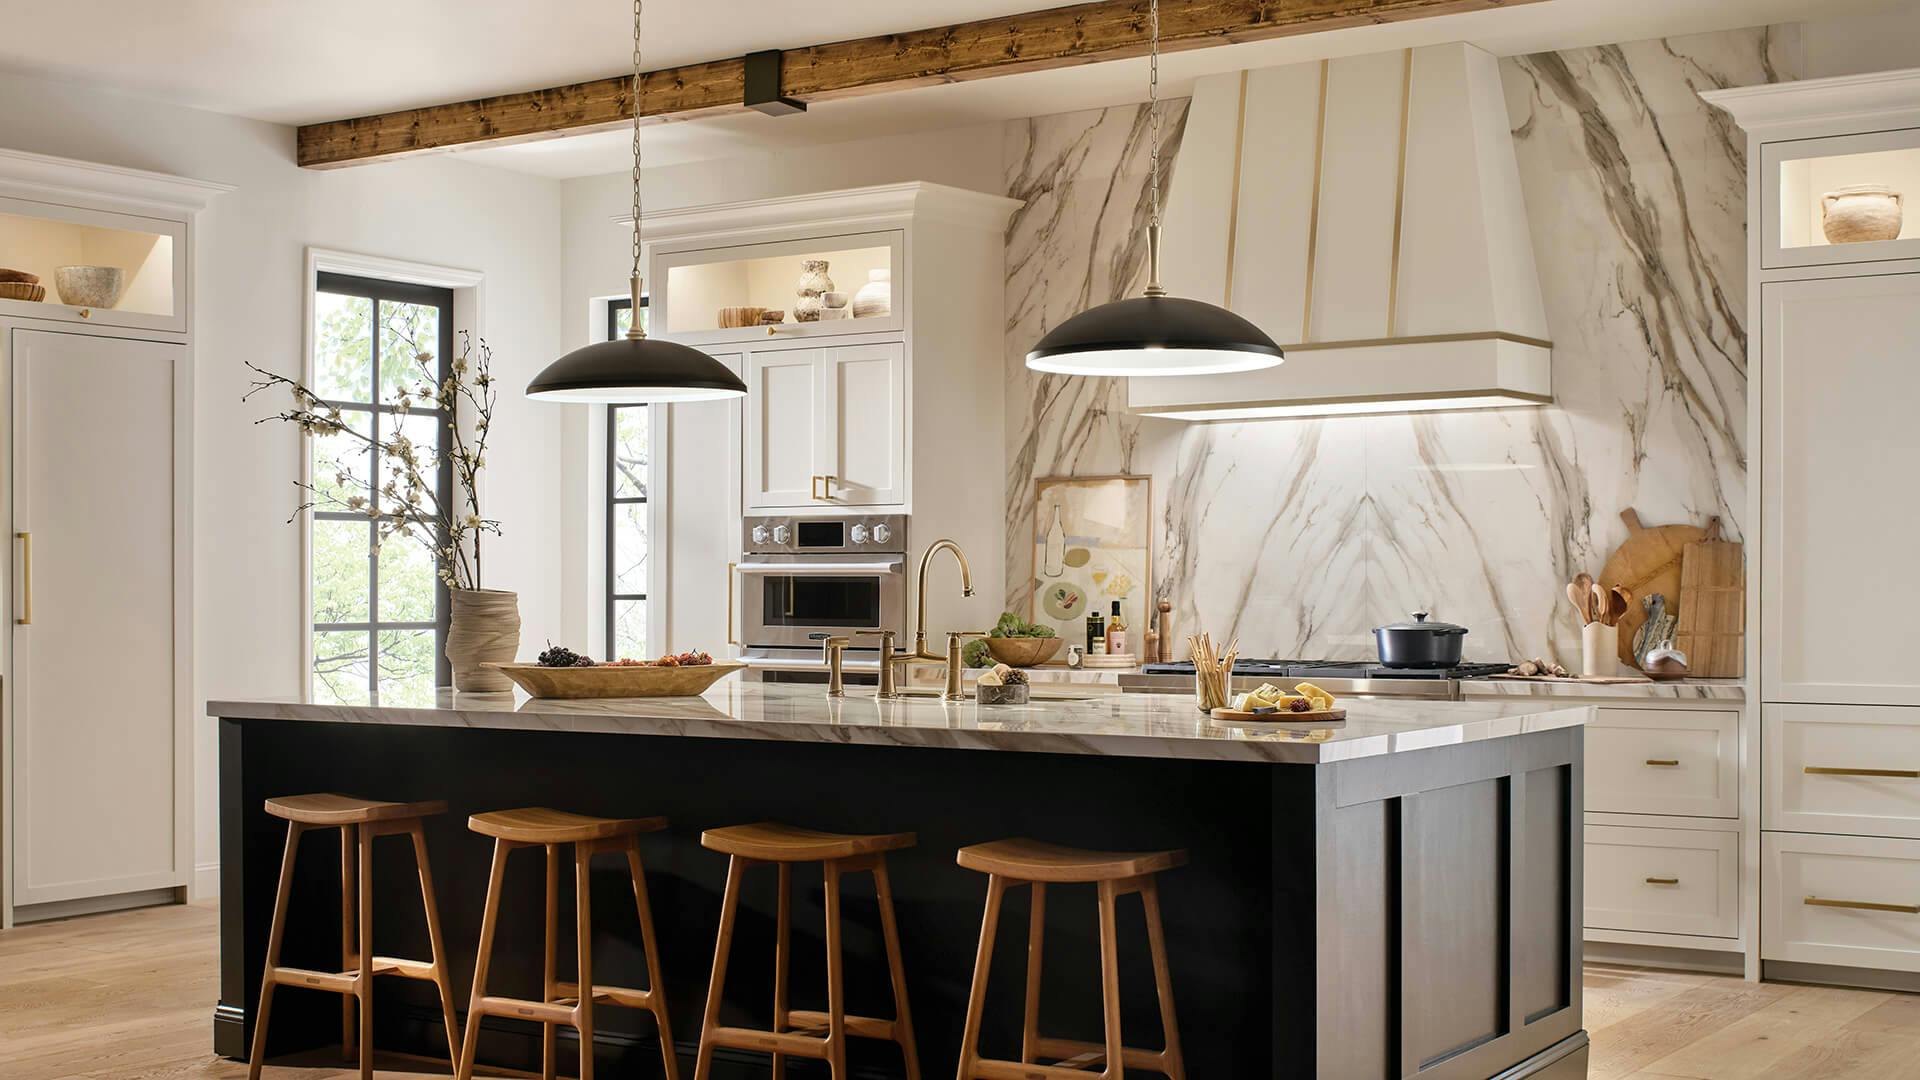 White and wood accented kitchen with black and gold finish Delarosa pendant lights above a large kitchen island